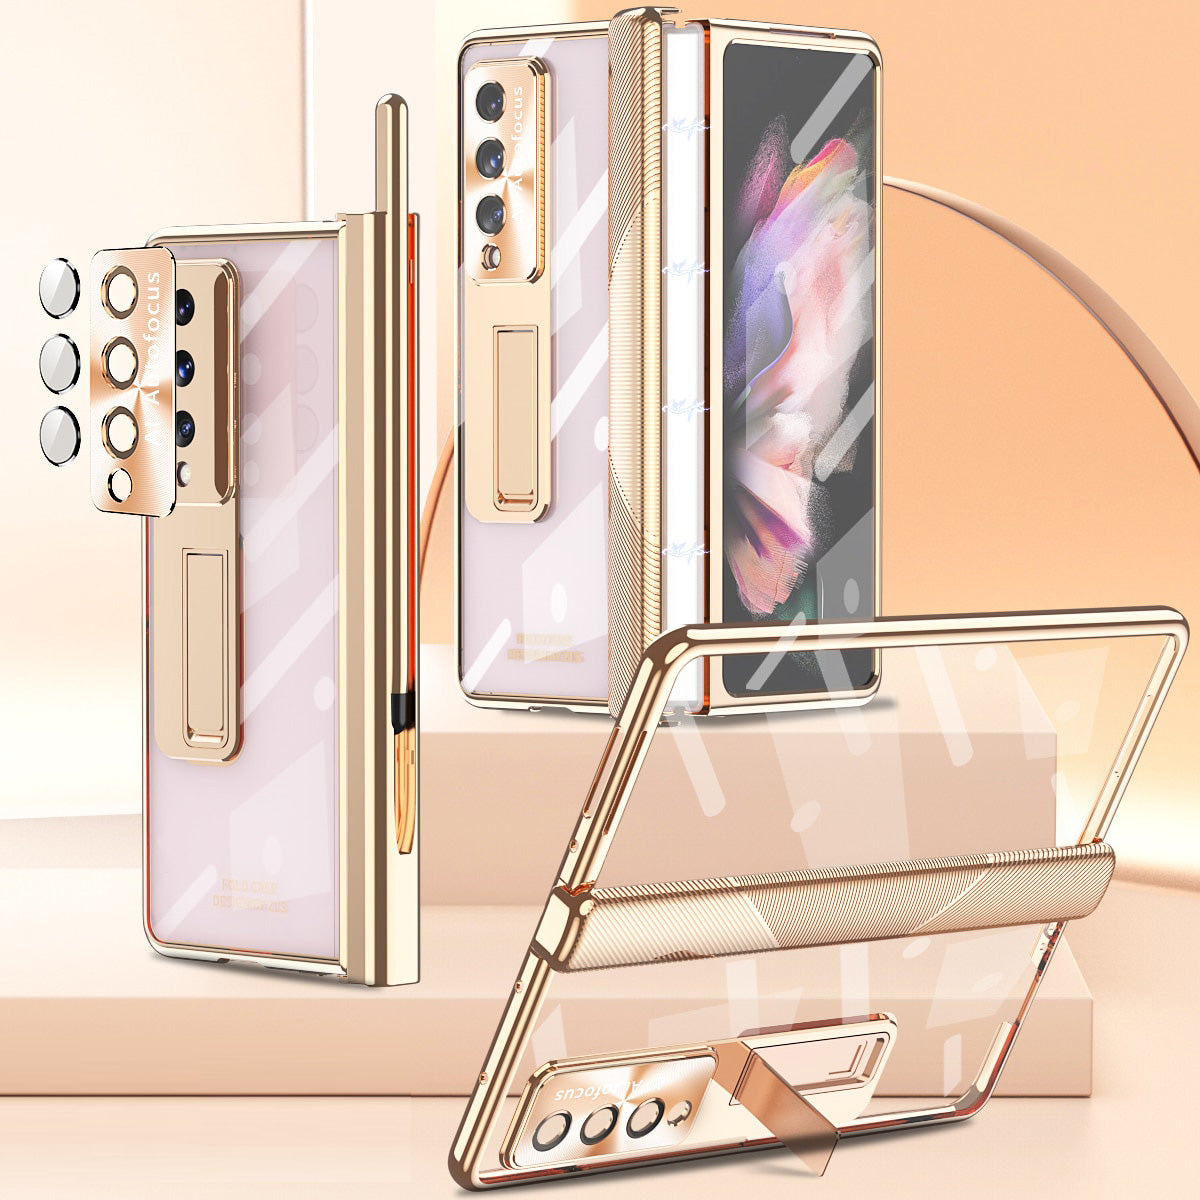 Magnetic Hinge Lens Protection Phone Case With S Pen Slot For Samsung Galaxy Z Fold